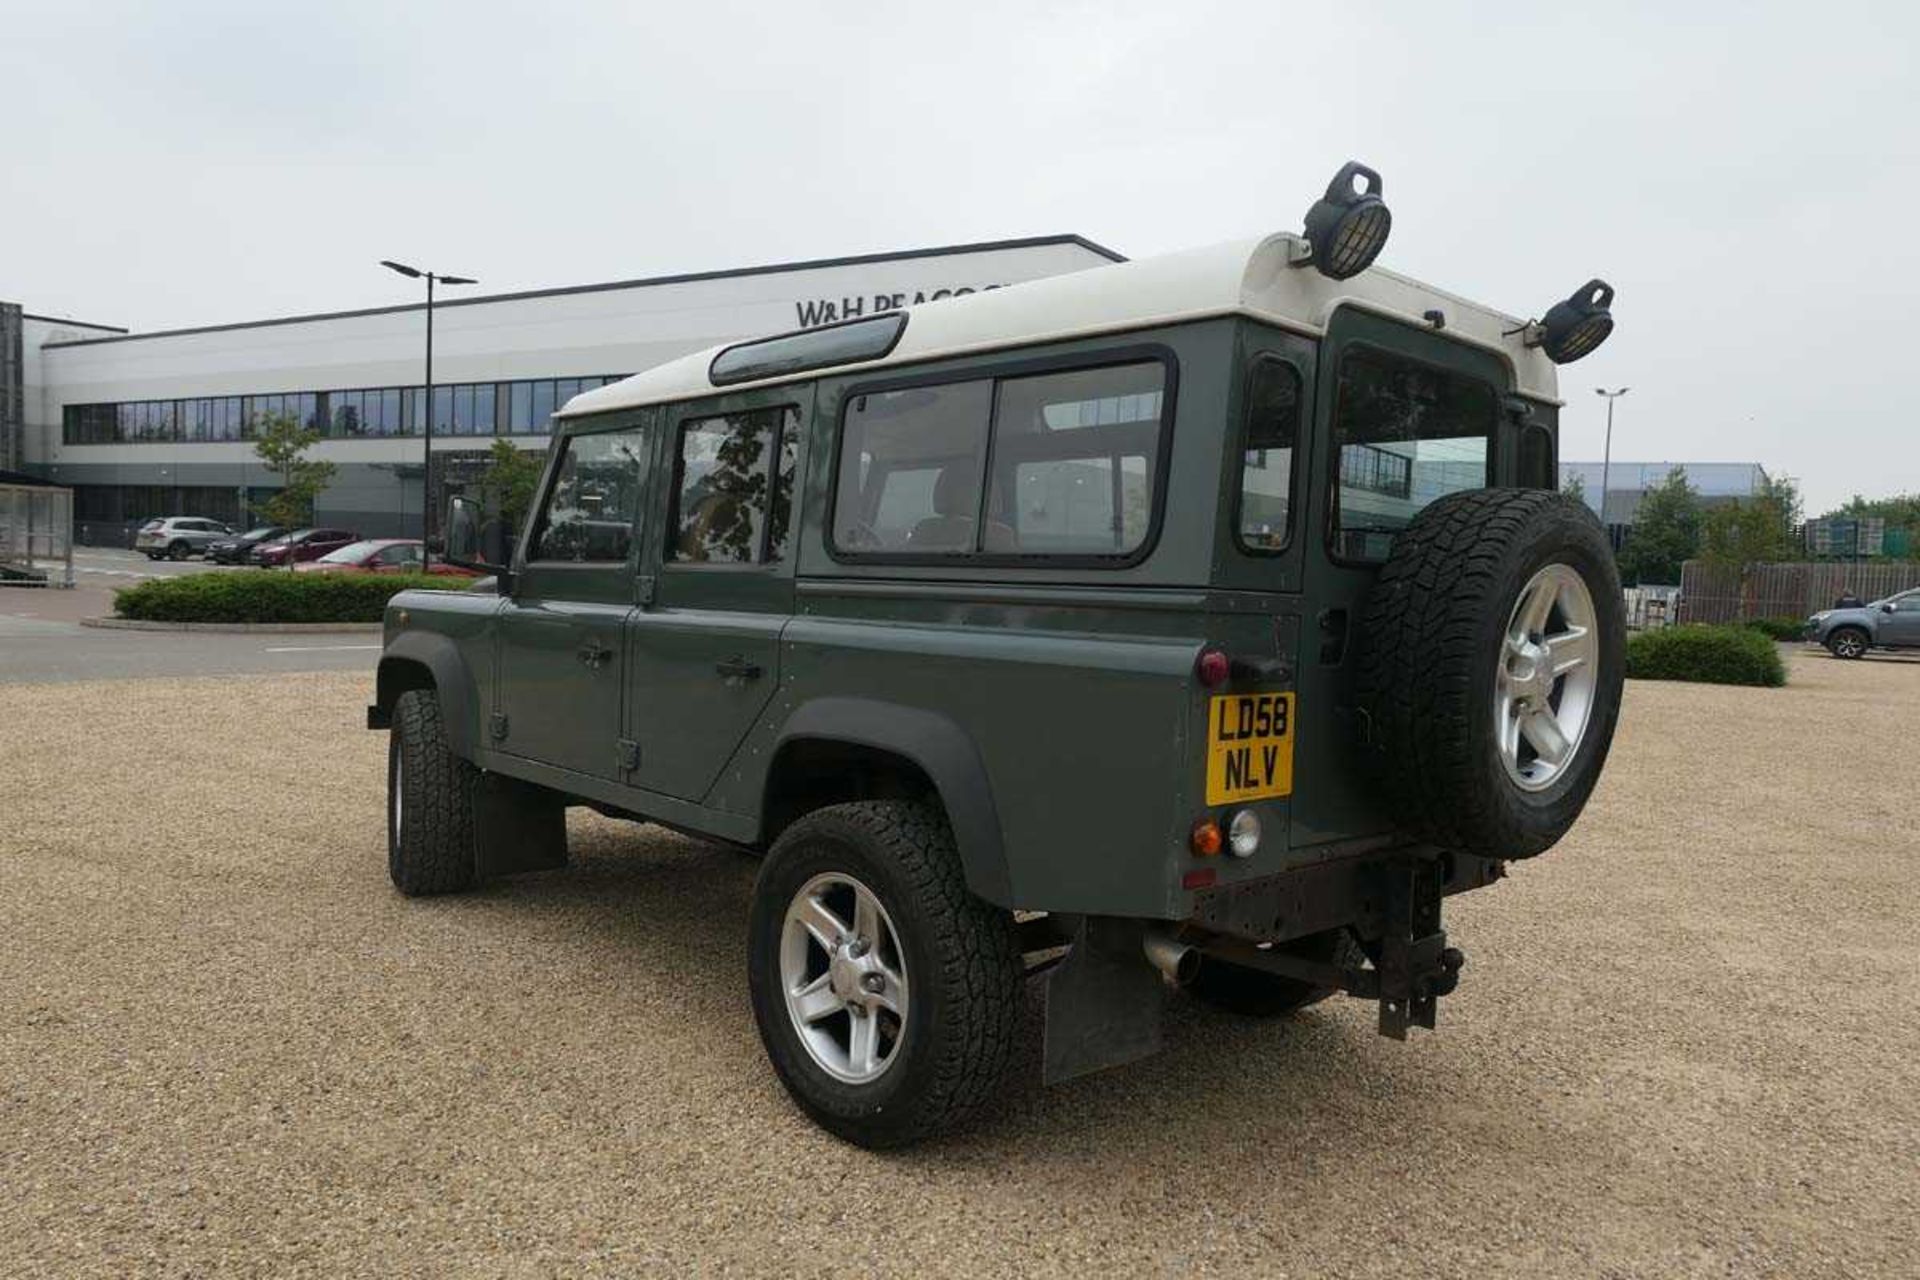 (LD58 NLV) 2008 Land Rover Defender 110 LWB station wagon estate in green, 2402cc diesel, 6-speed - Image 13 of 20